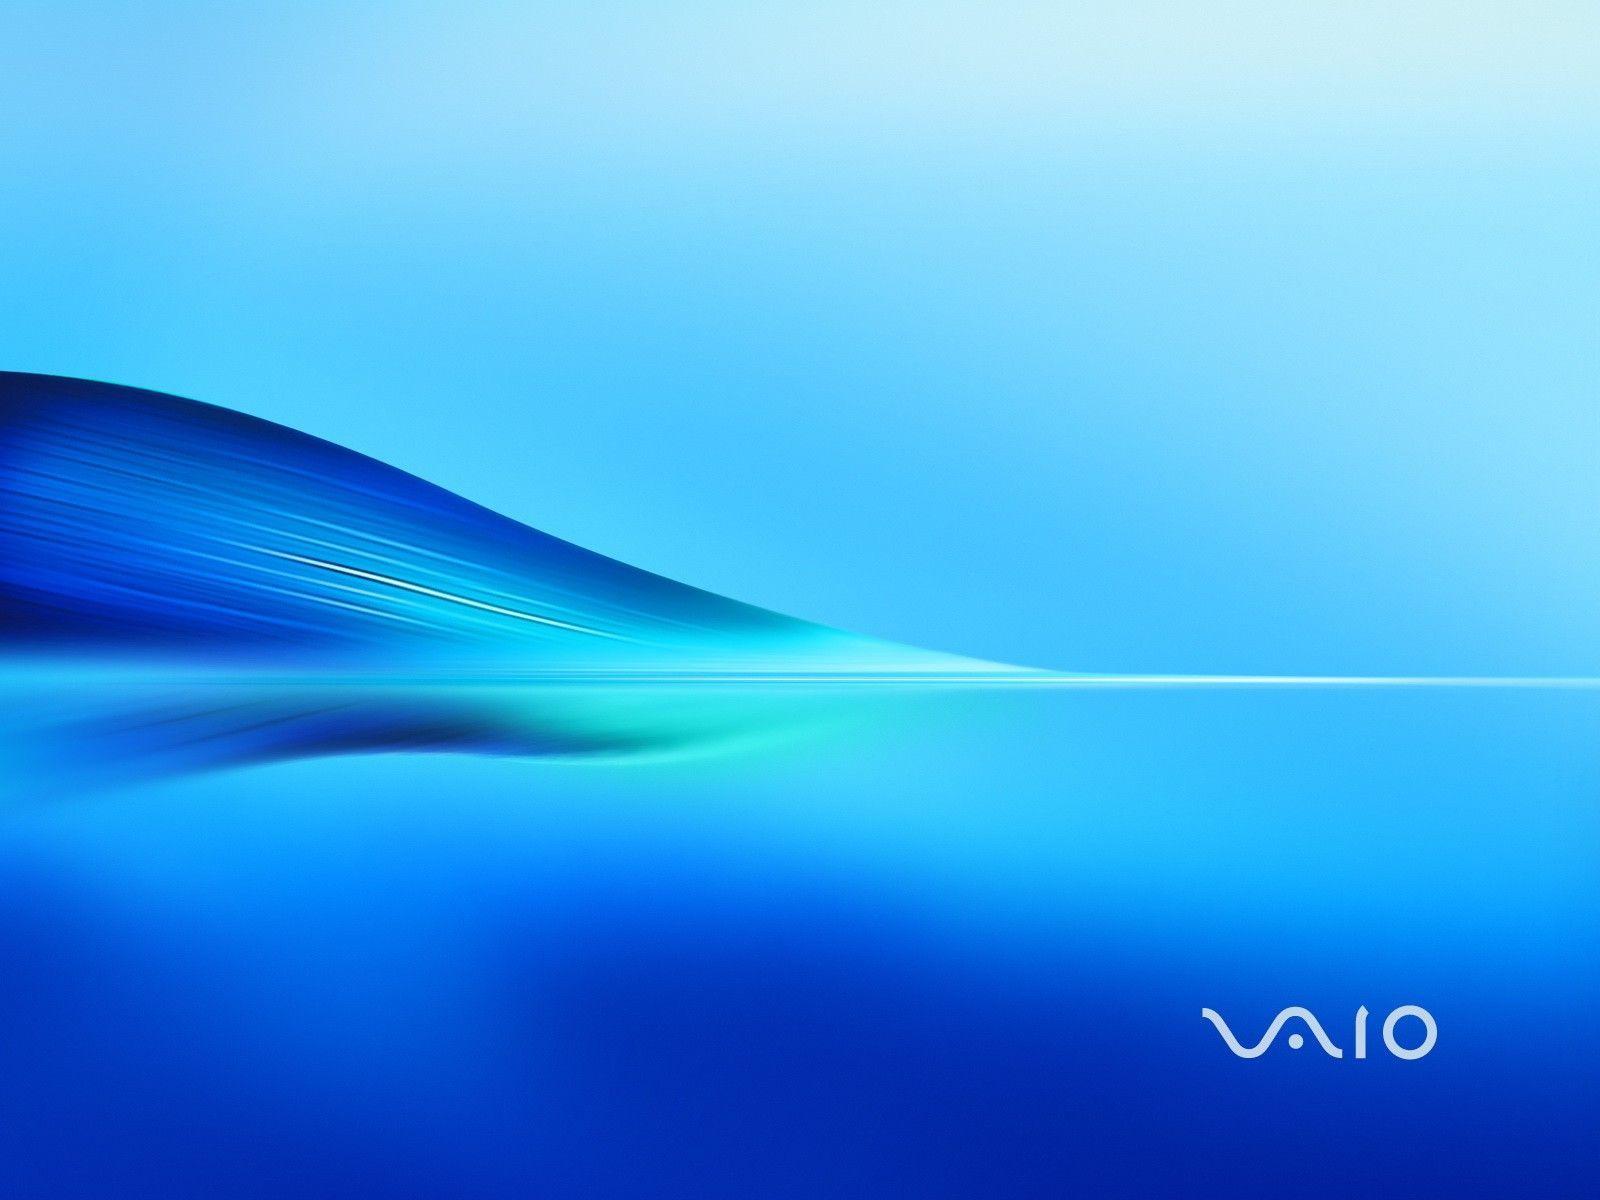 Sony Vaio Windows 7 Wallpapers Top Free Sony Vaio Windows 7 Backgrounds Wallpaperaccess